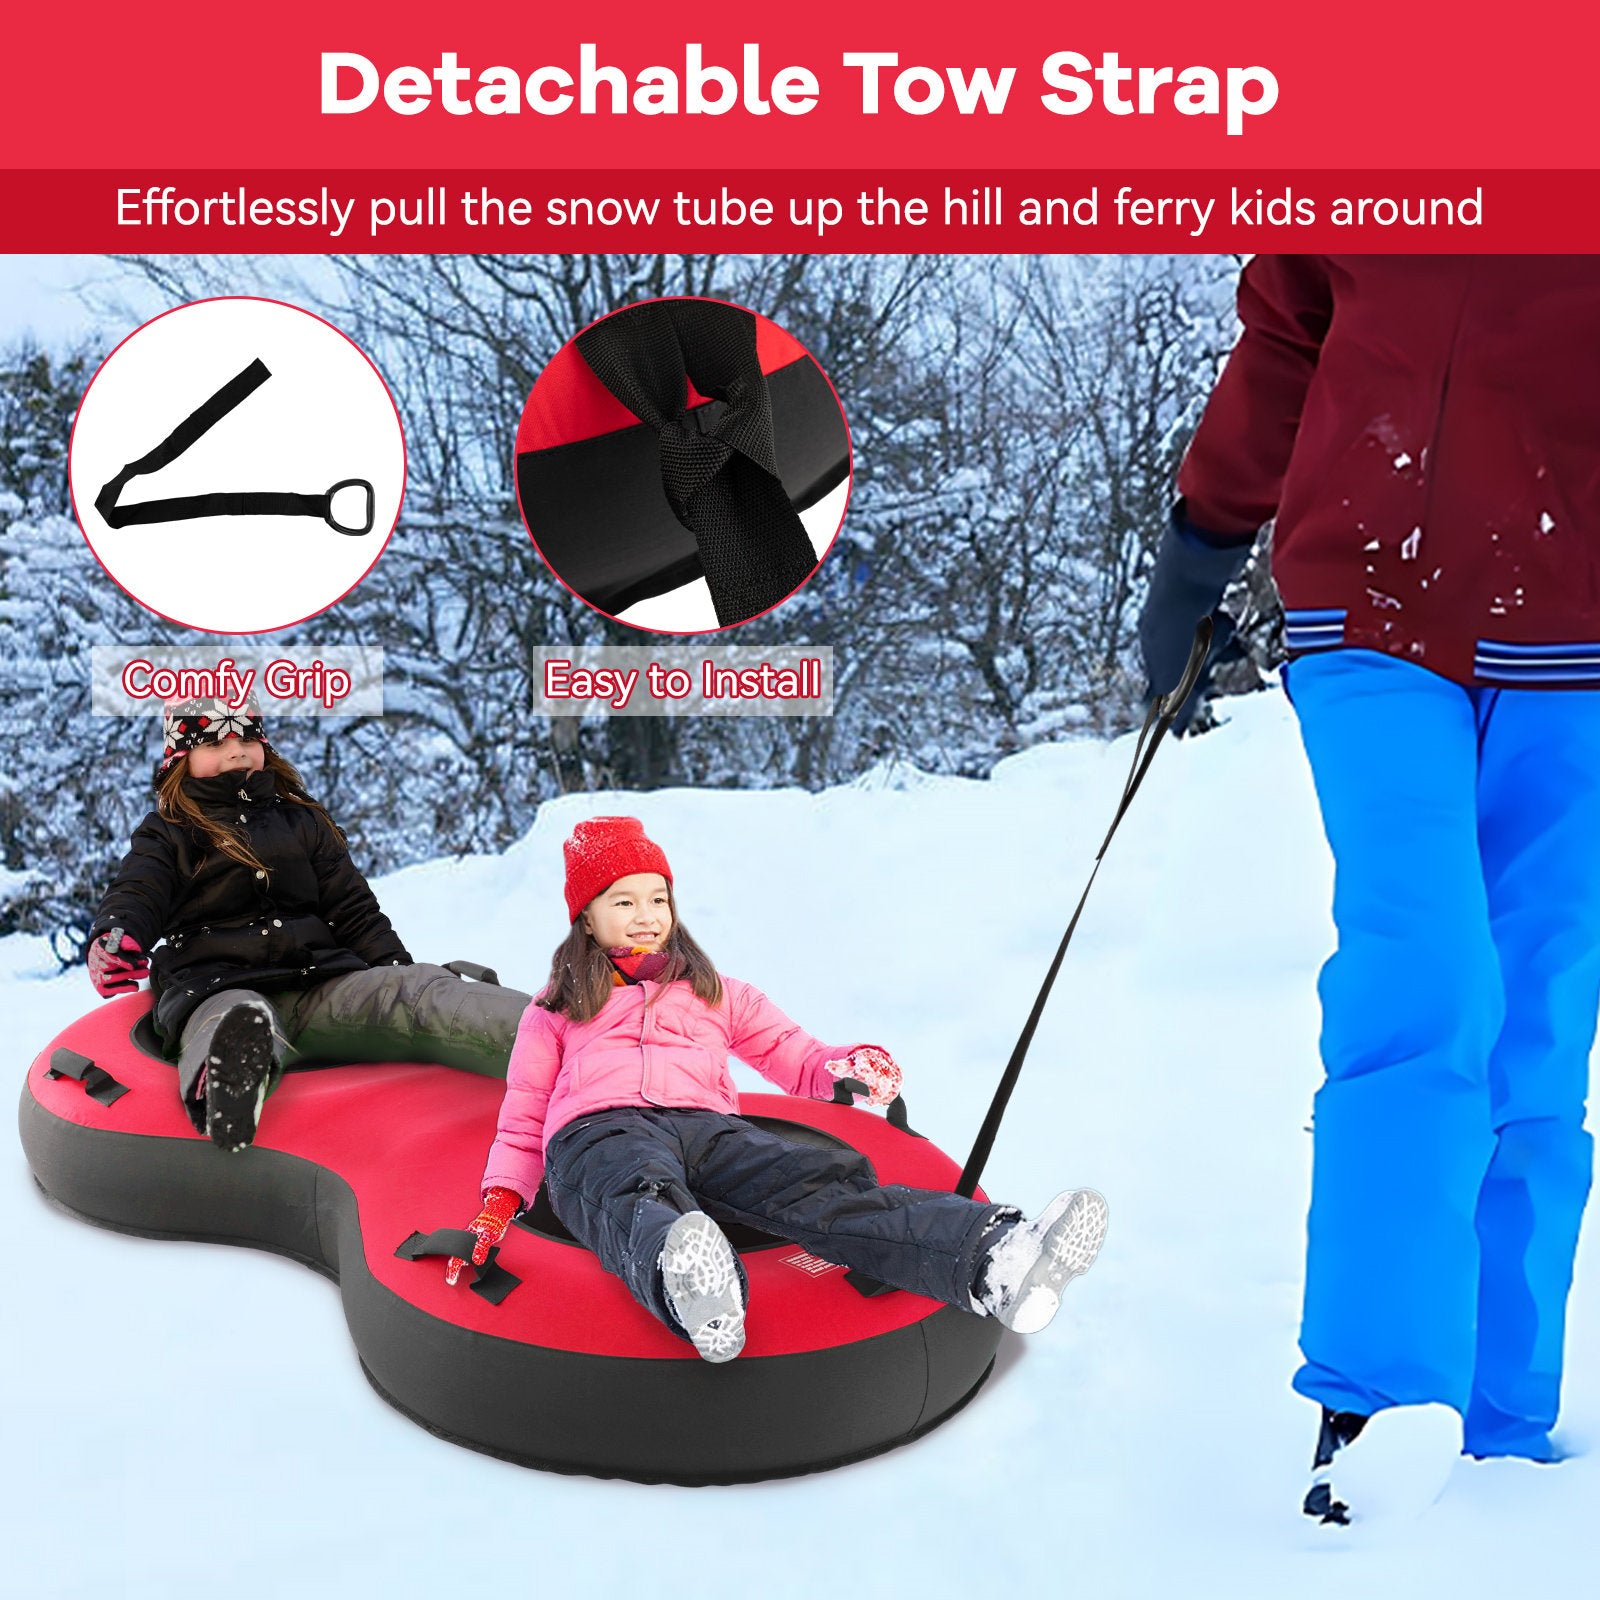 80" 2-Person Inflatable Snow Sled for Kids and Adults, Red at Gallery Canada